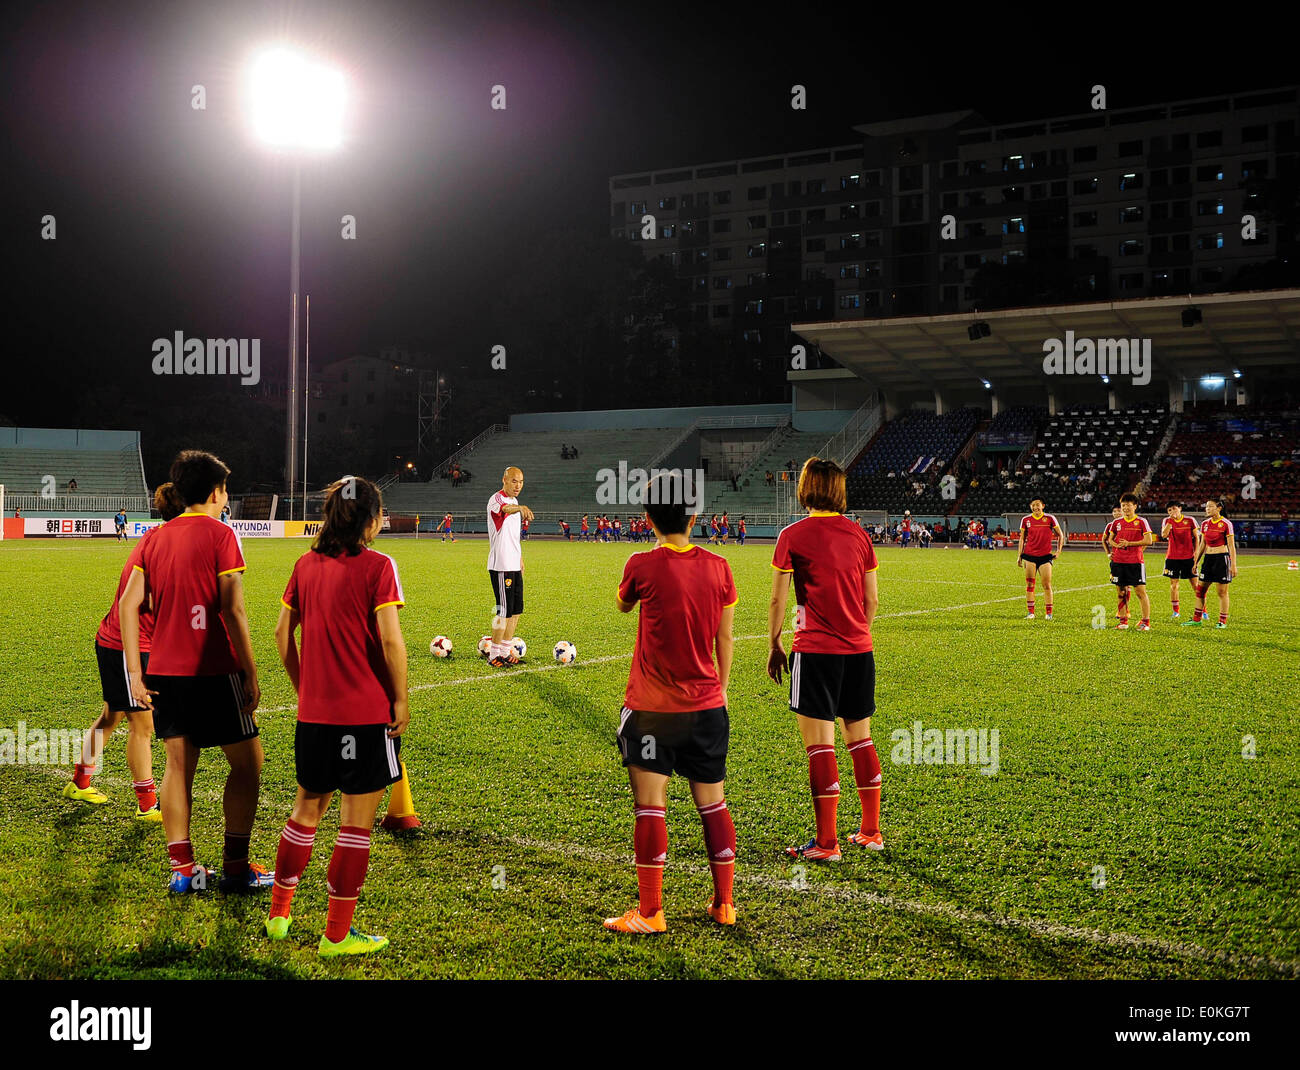 Ho Chi Minh City, Vietnam. 15th May, 2014. Players of China warm up before the Group B match against Thailand at the 2014 AFC Women's Asian Cup held at Thong Nhat Stadium in Ho Chi Minh city, Vietnam, May 15, 2014. China beat Thailand 7-0. © He Jingjia/Xinhua/Alamy Live News Stock Photo